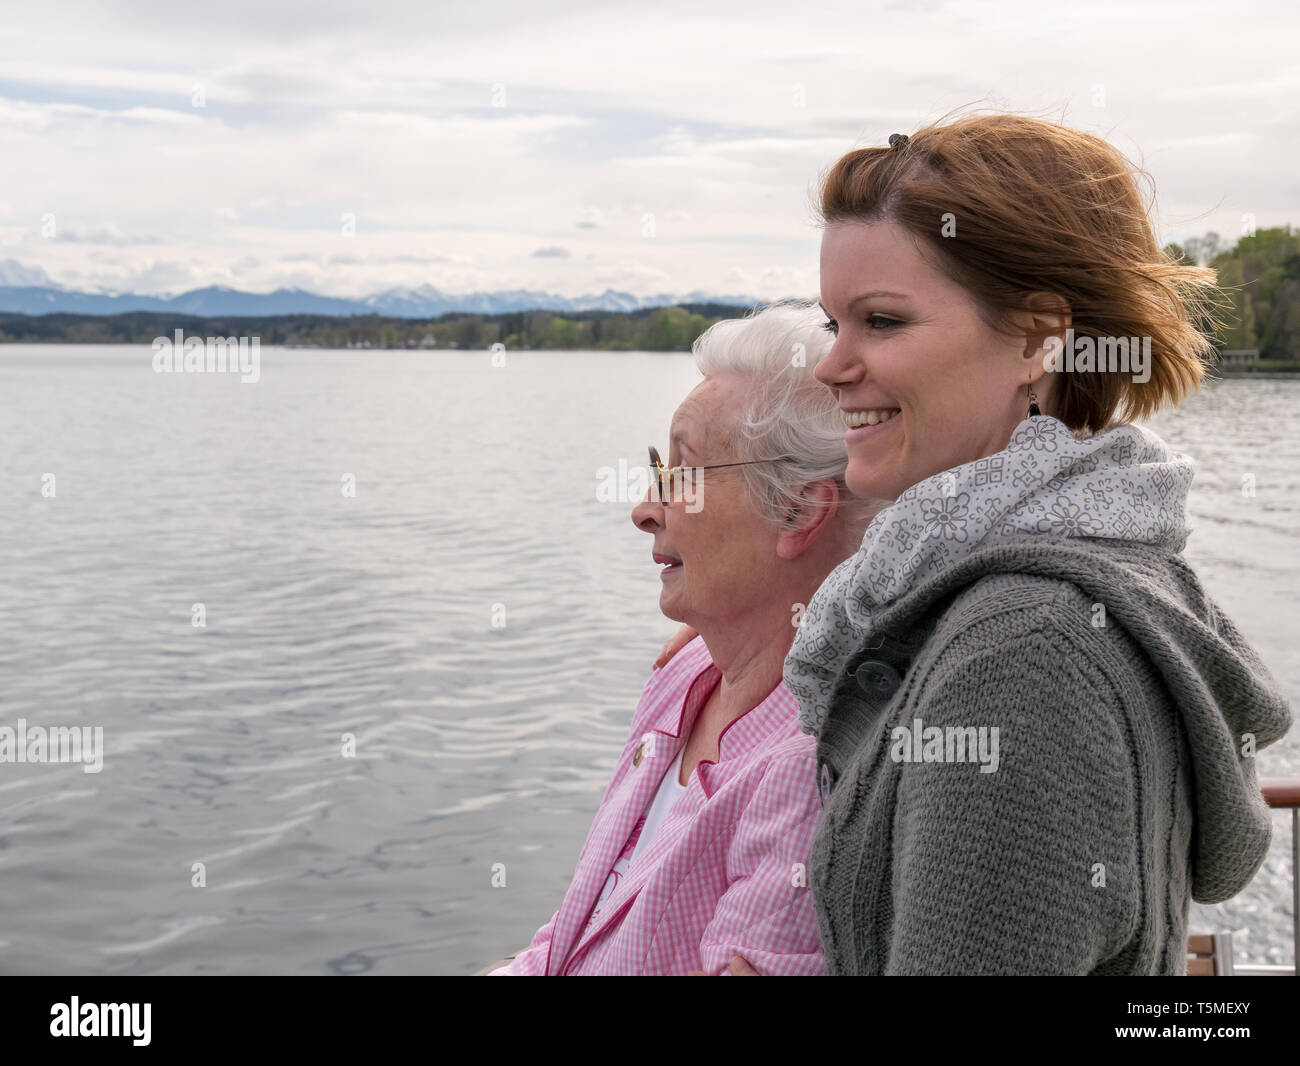 Senior lady with young woman making a boat trip Stock Photo